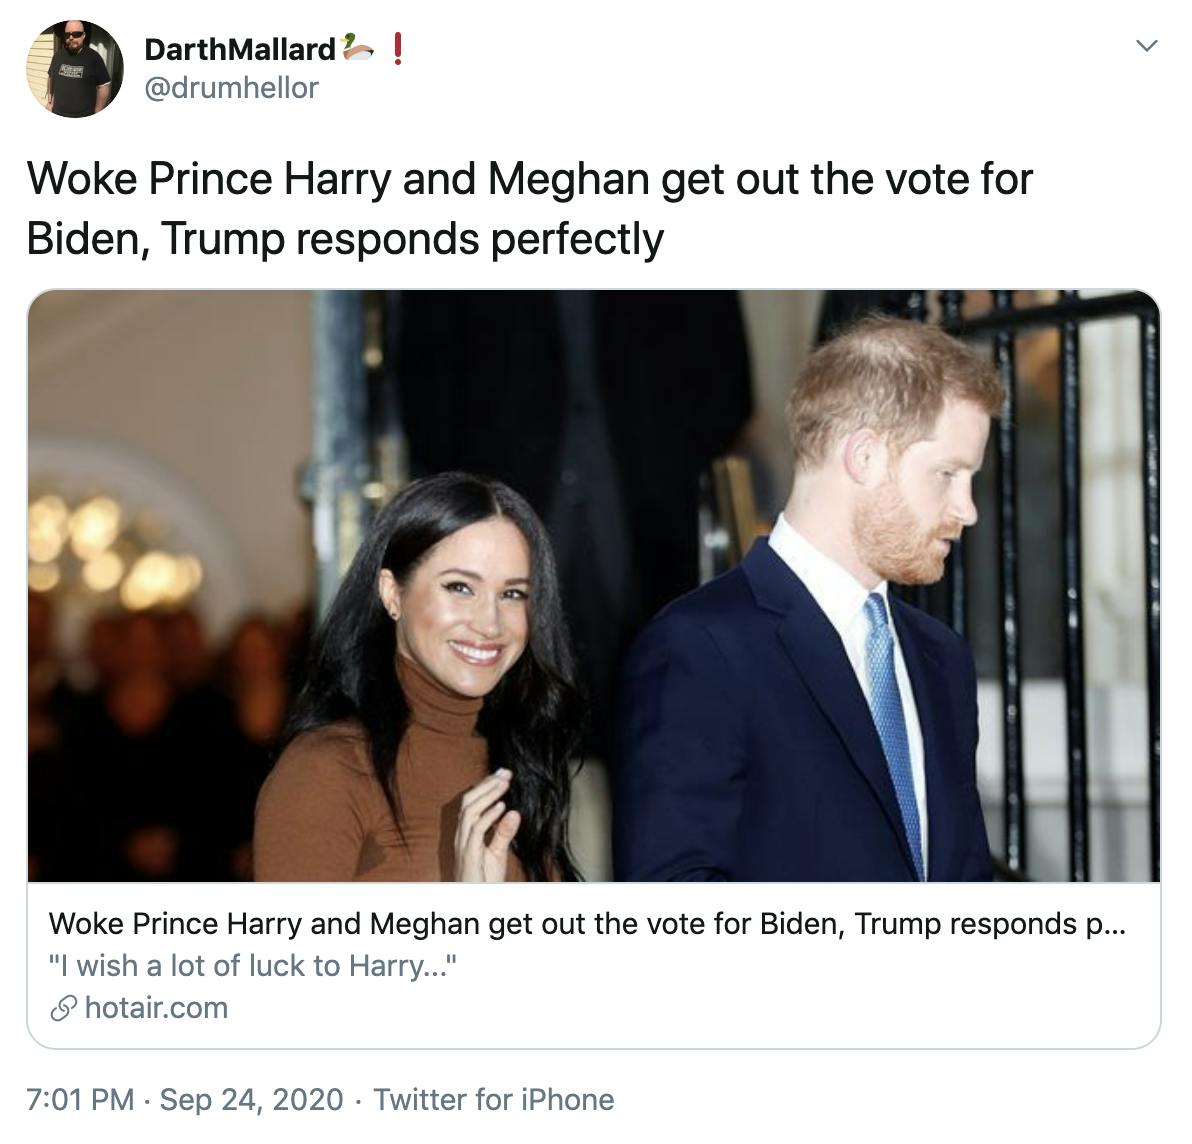 Woke Prince Harry and Meghan get out the vote for Biden, Trump responds perfectly